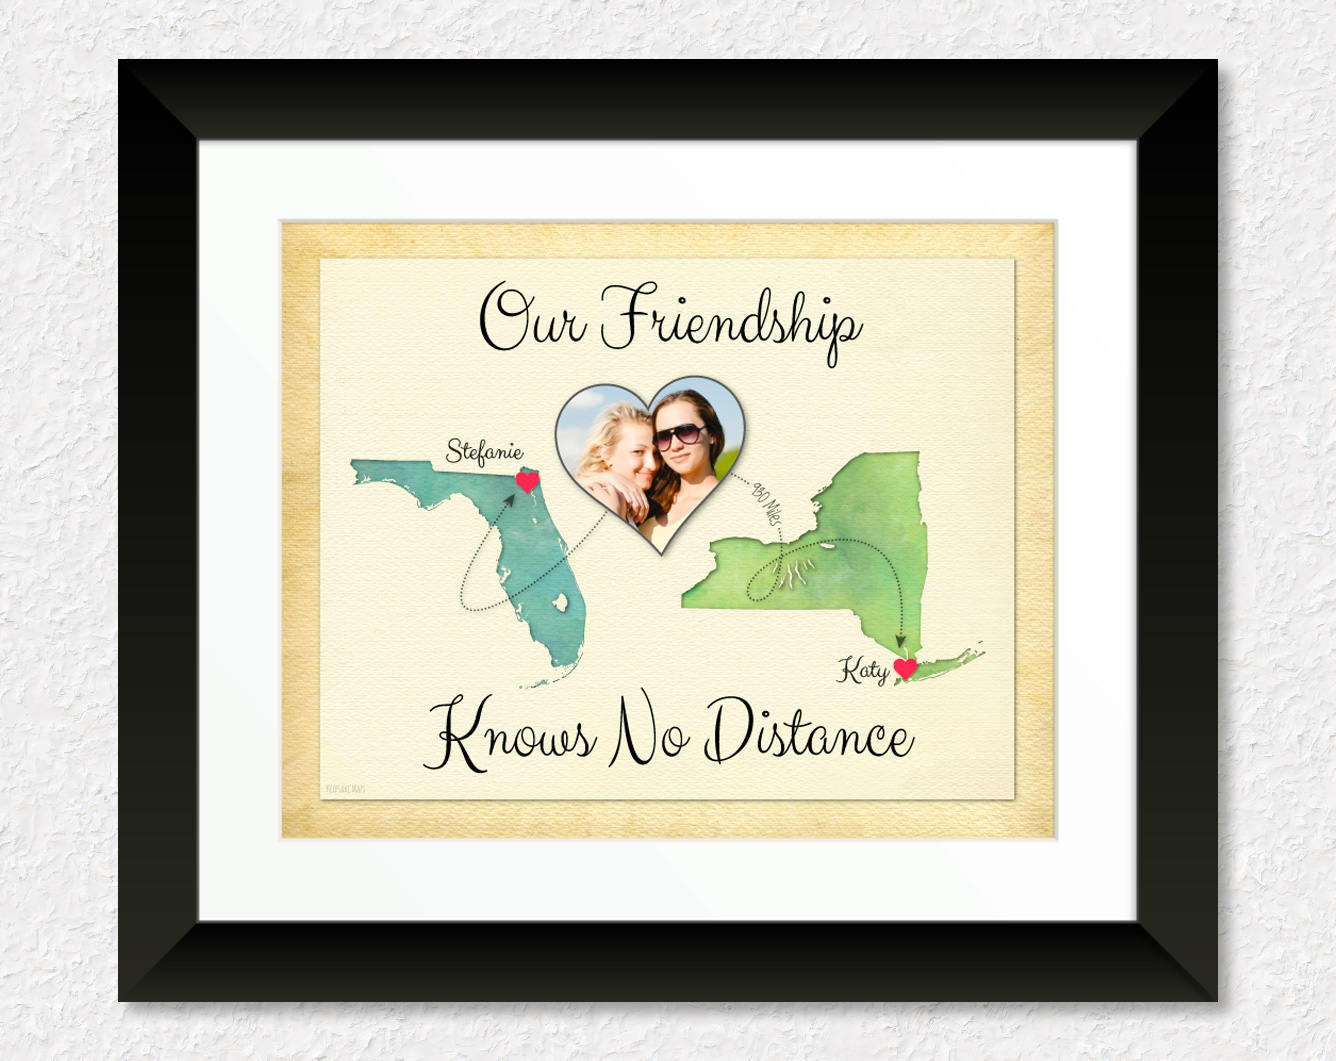 Best Friend Moving Away Gift Ideas
 Moving Away Gift for Best Friend Going Away Gift for BFF